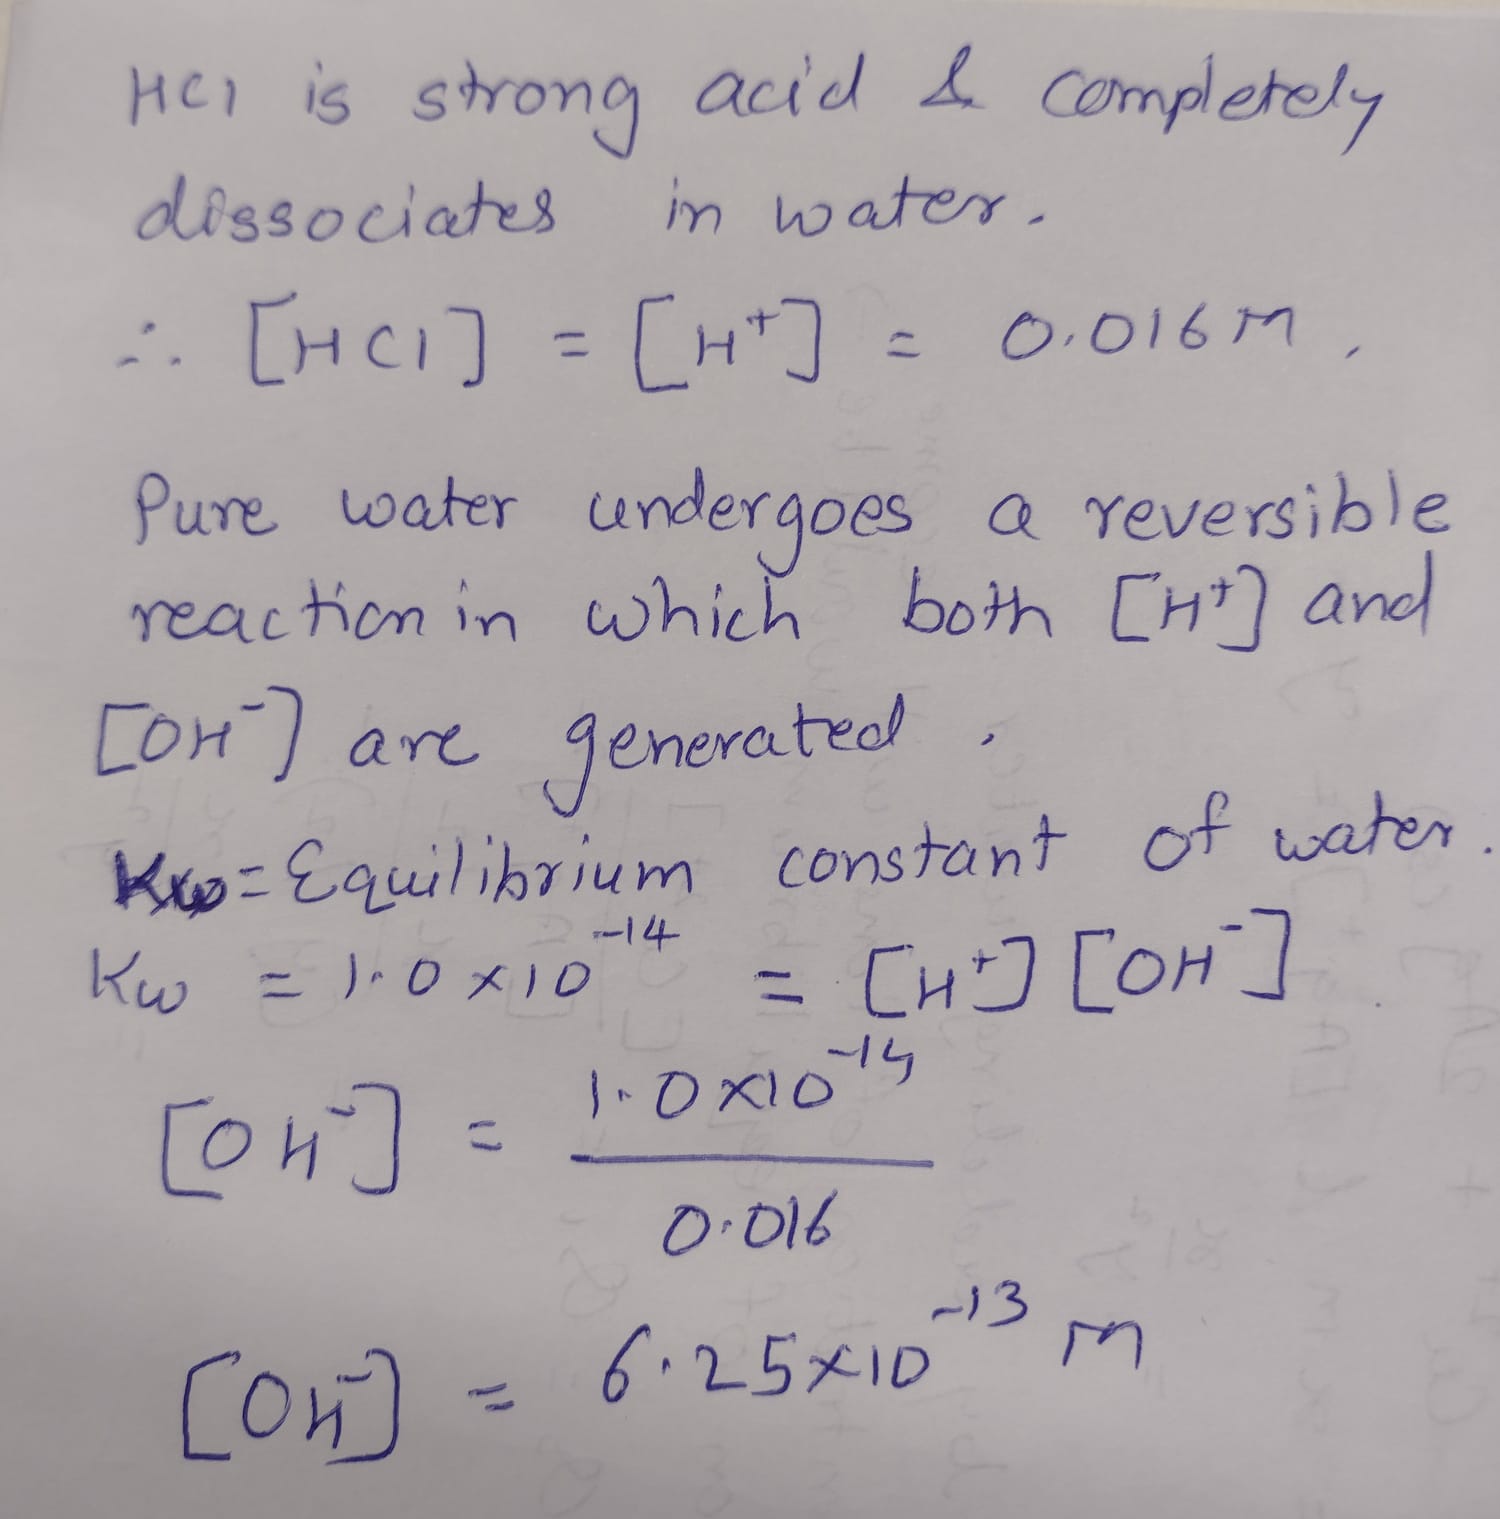 Strength of acid, water dissociation constant